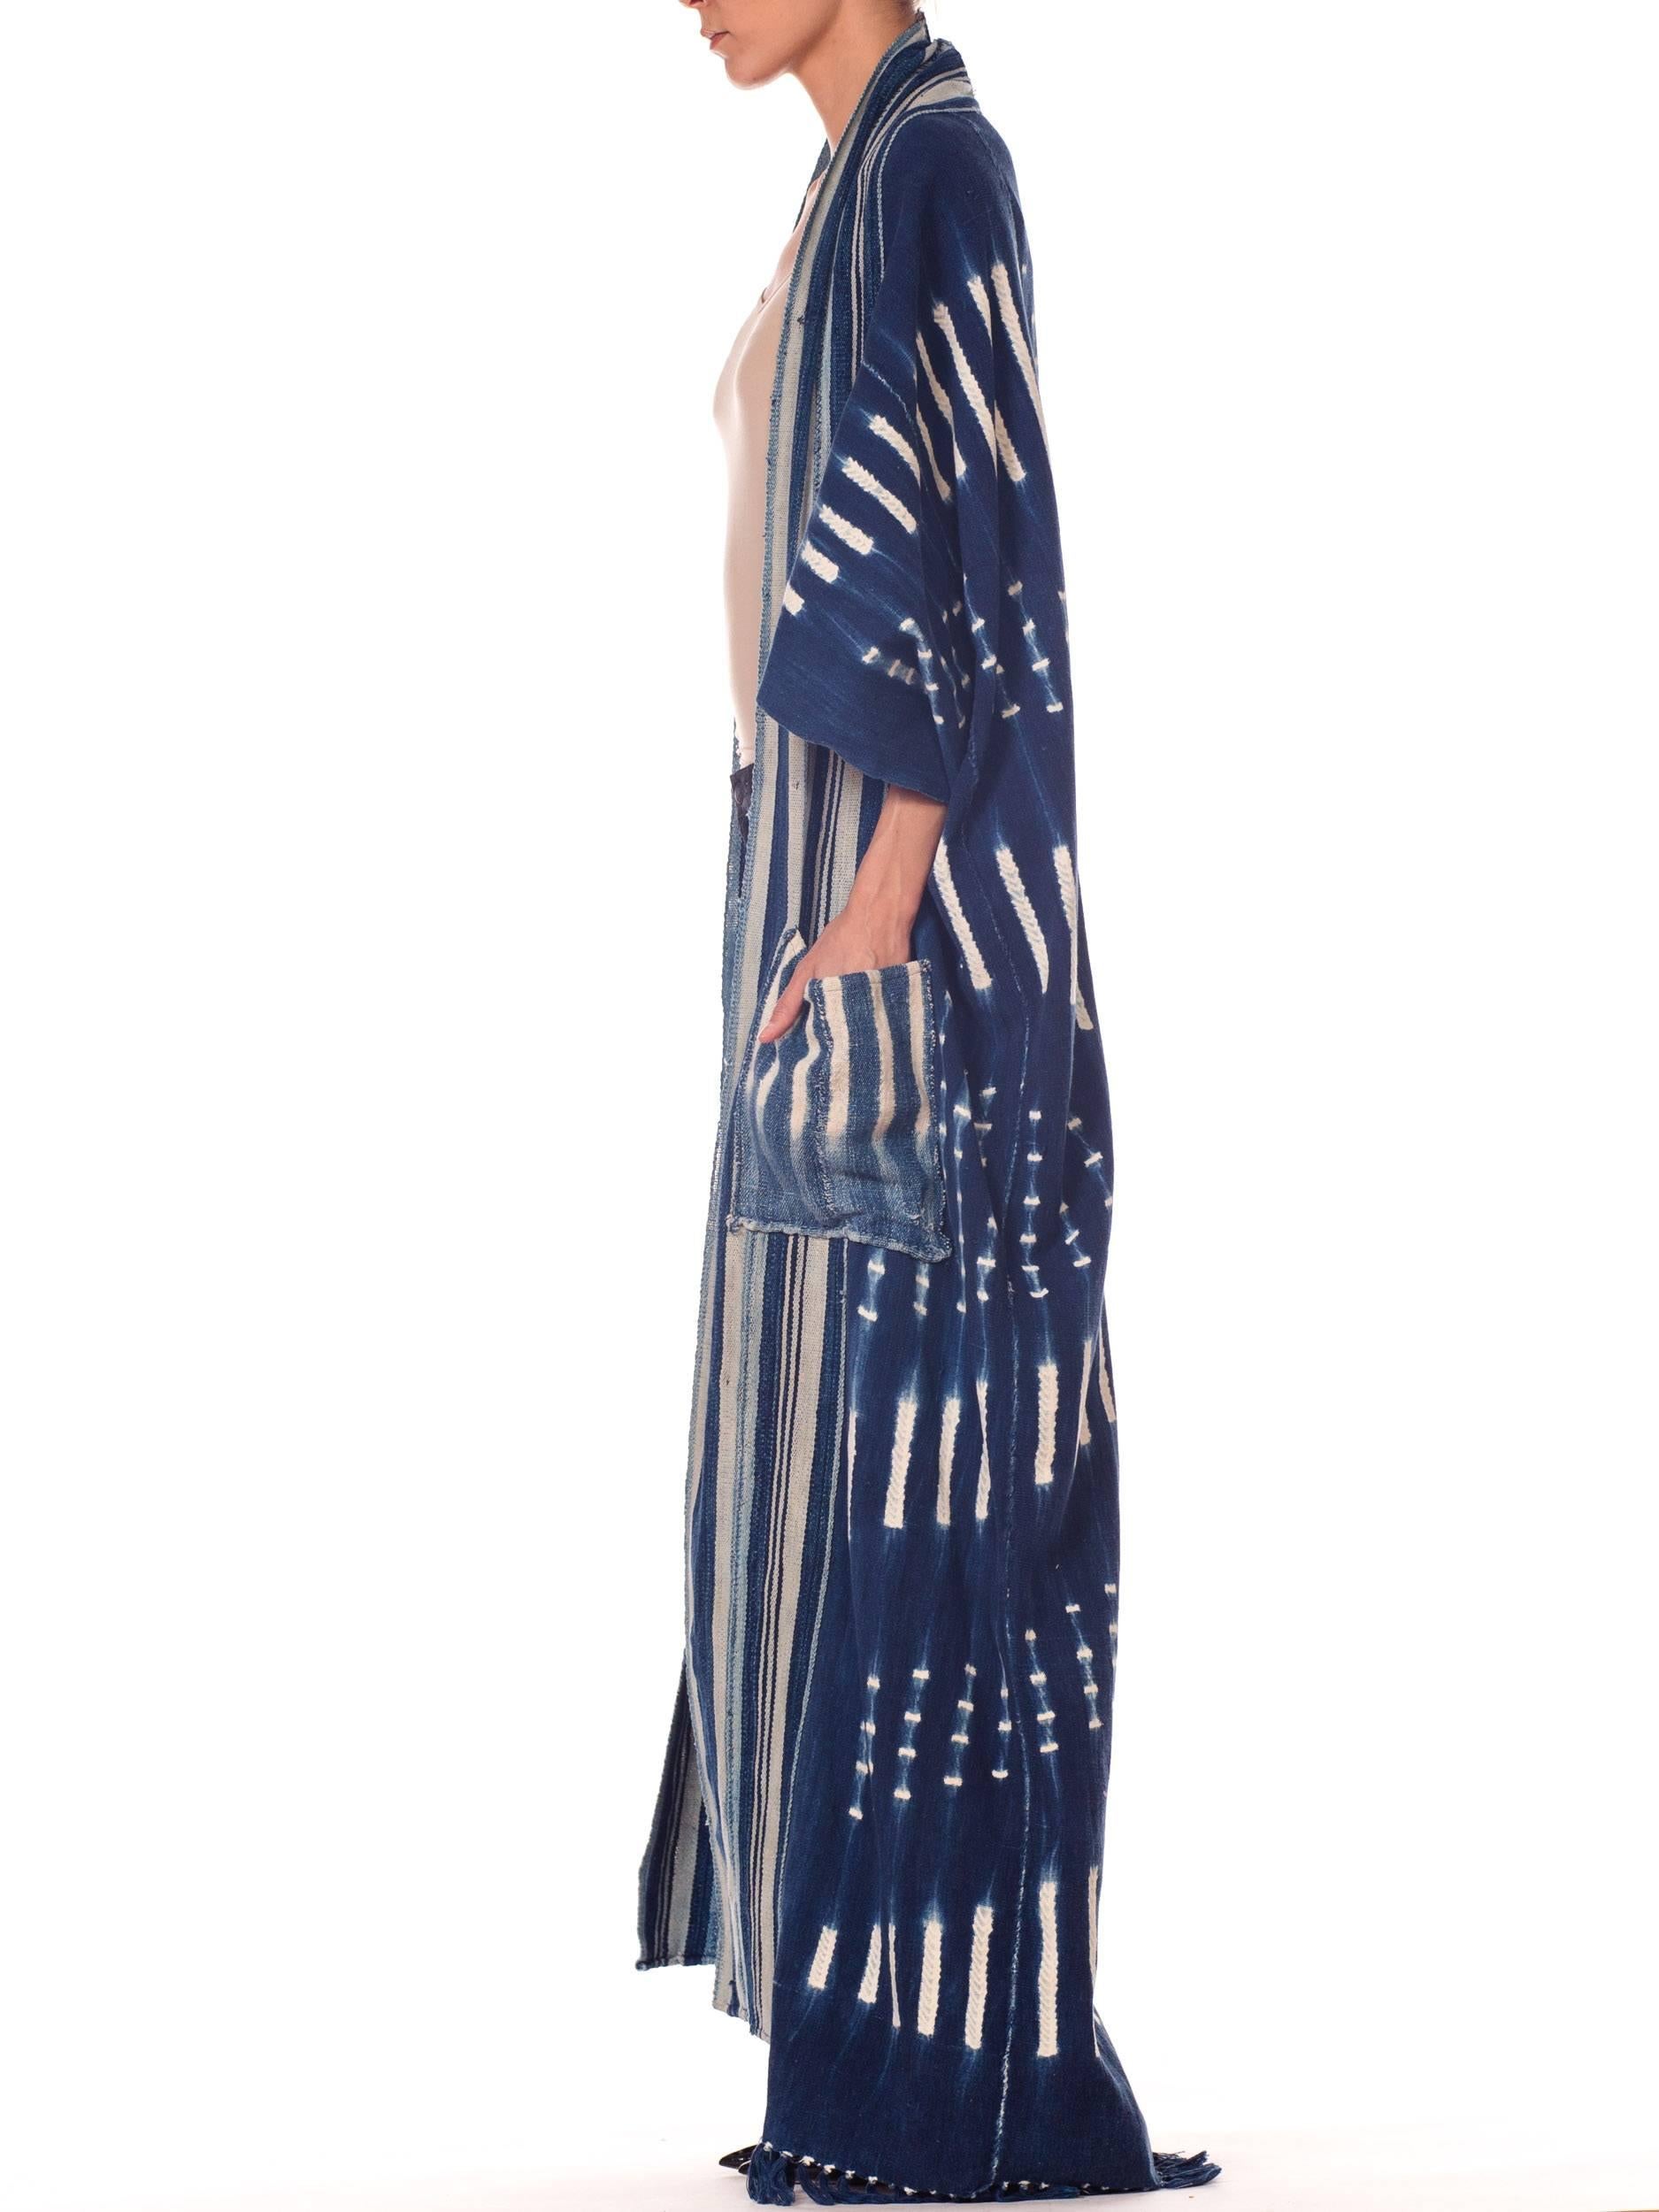 Morphew Collection African Handwoven Tie-dye Indigo Robe with Striped Collar 1